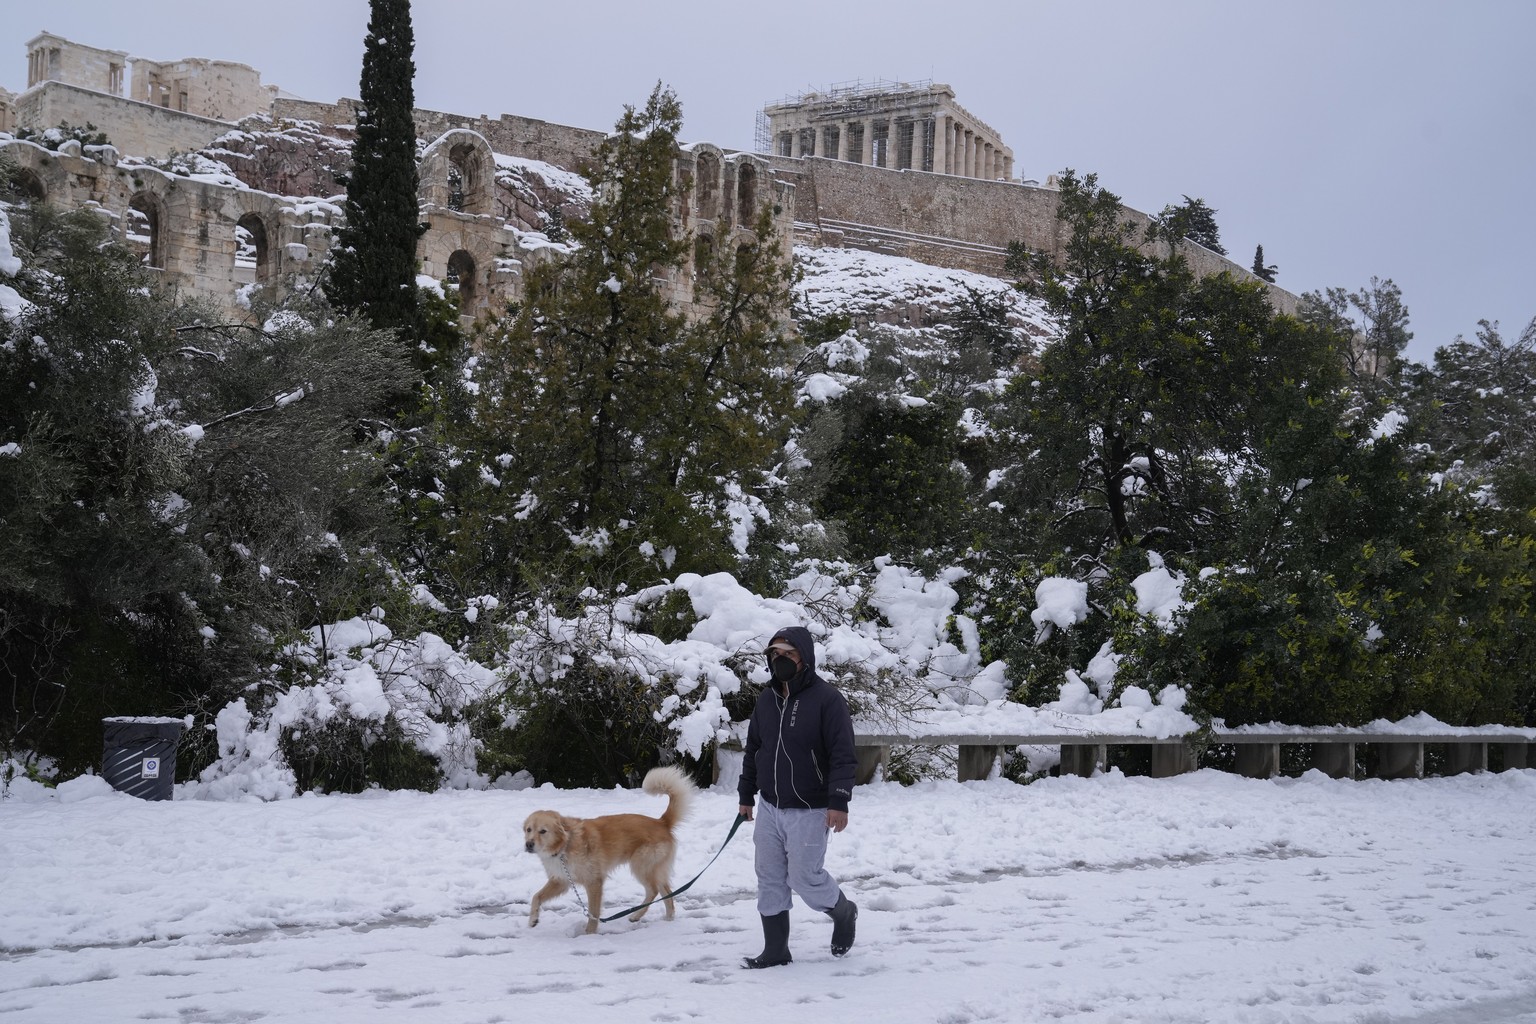 A pedestrian walks with his dog on the snow in front of the ancient Acropolis hill, in Athens, on Tuesday, Jan. 25, 2022. A snowstorm of rare severity disrupted road and air traffic Monday in the Gree ...